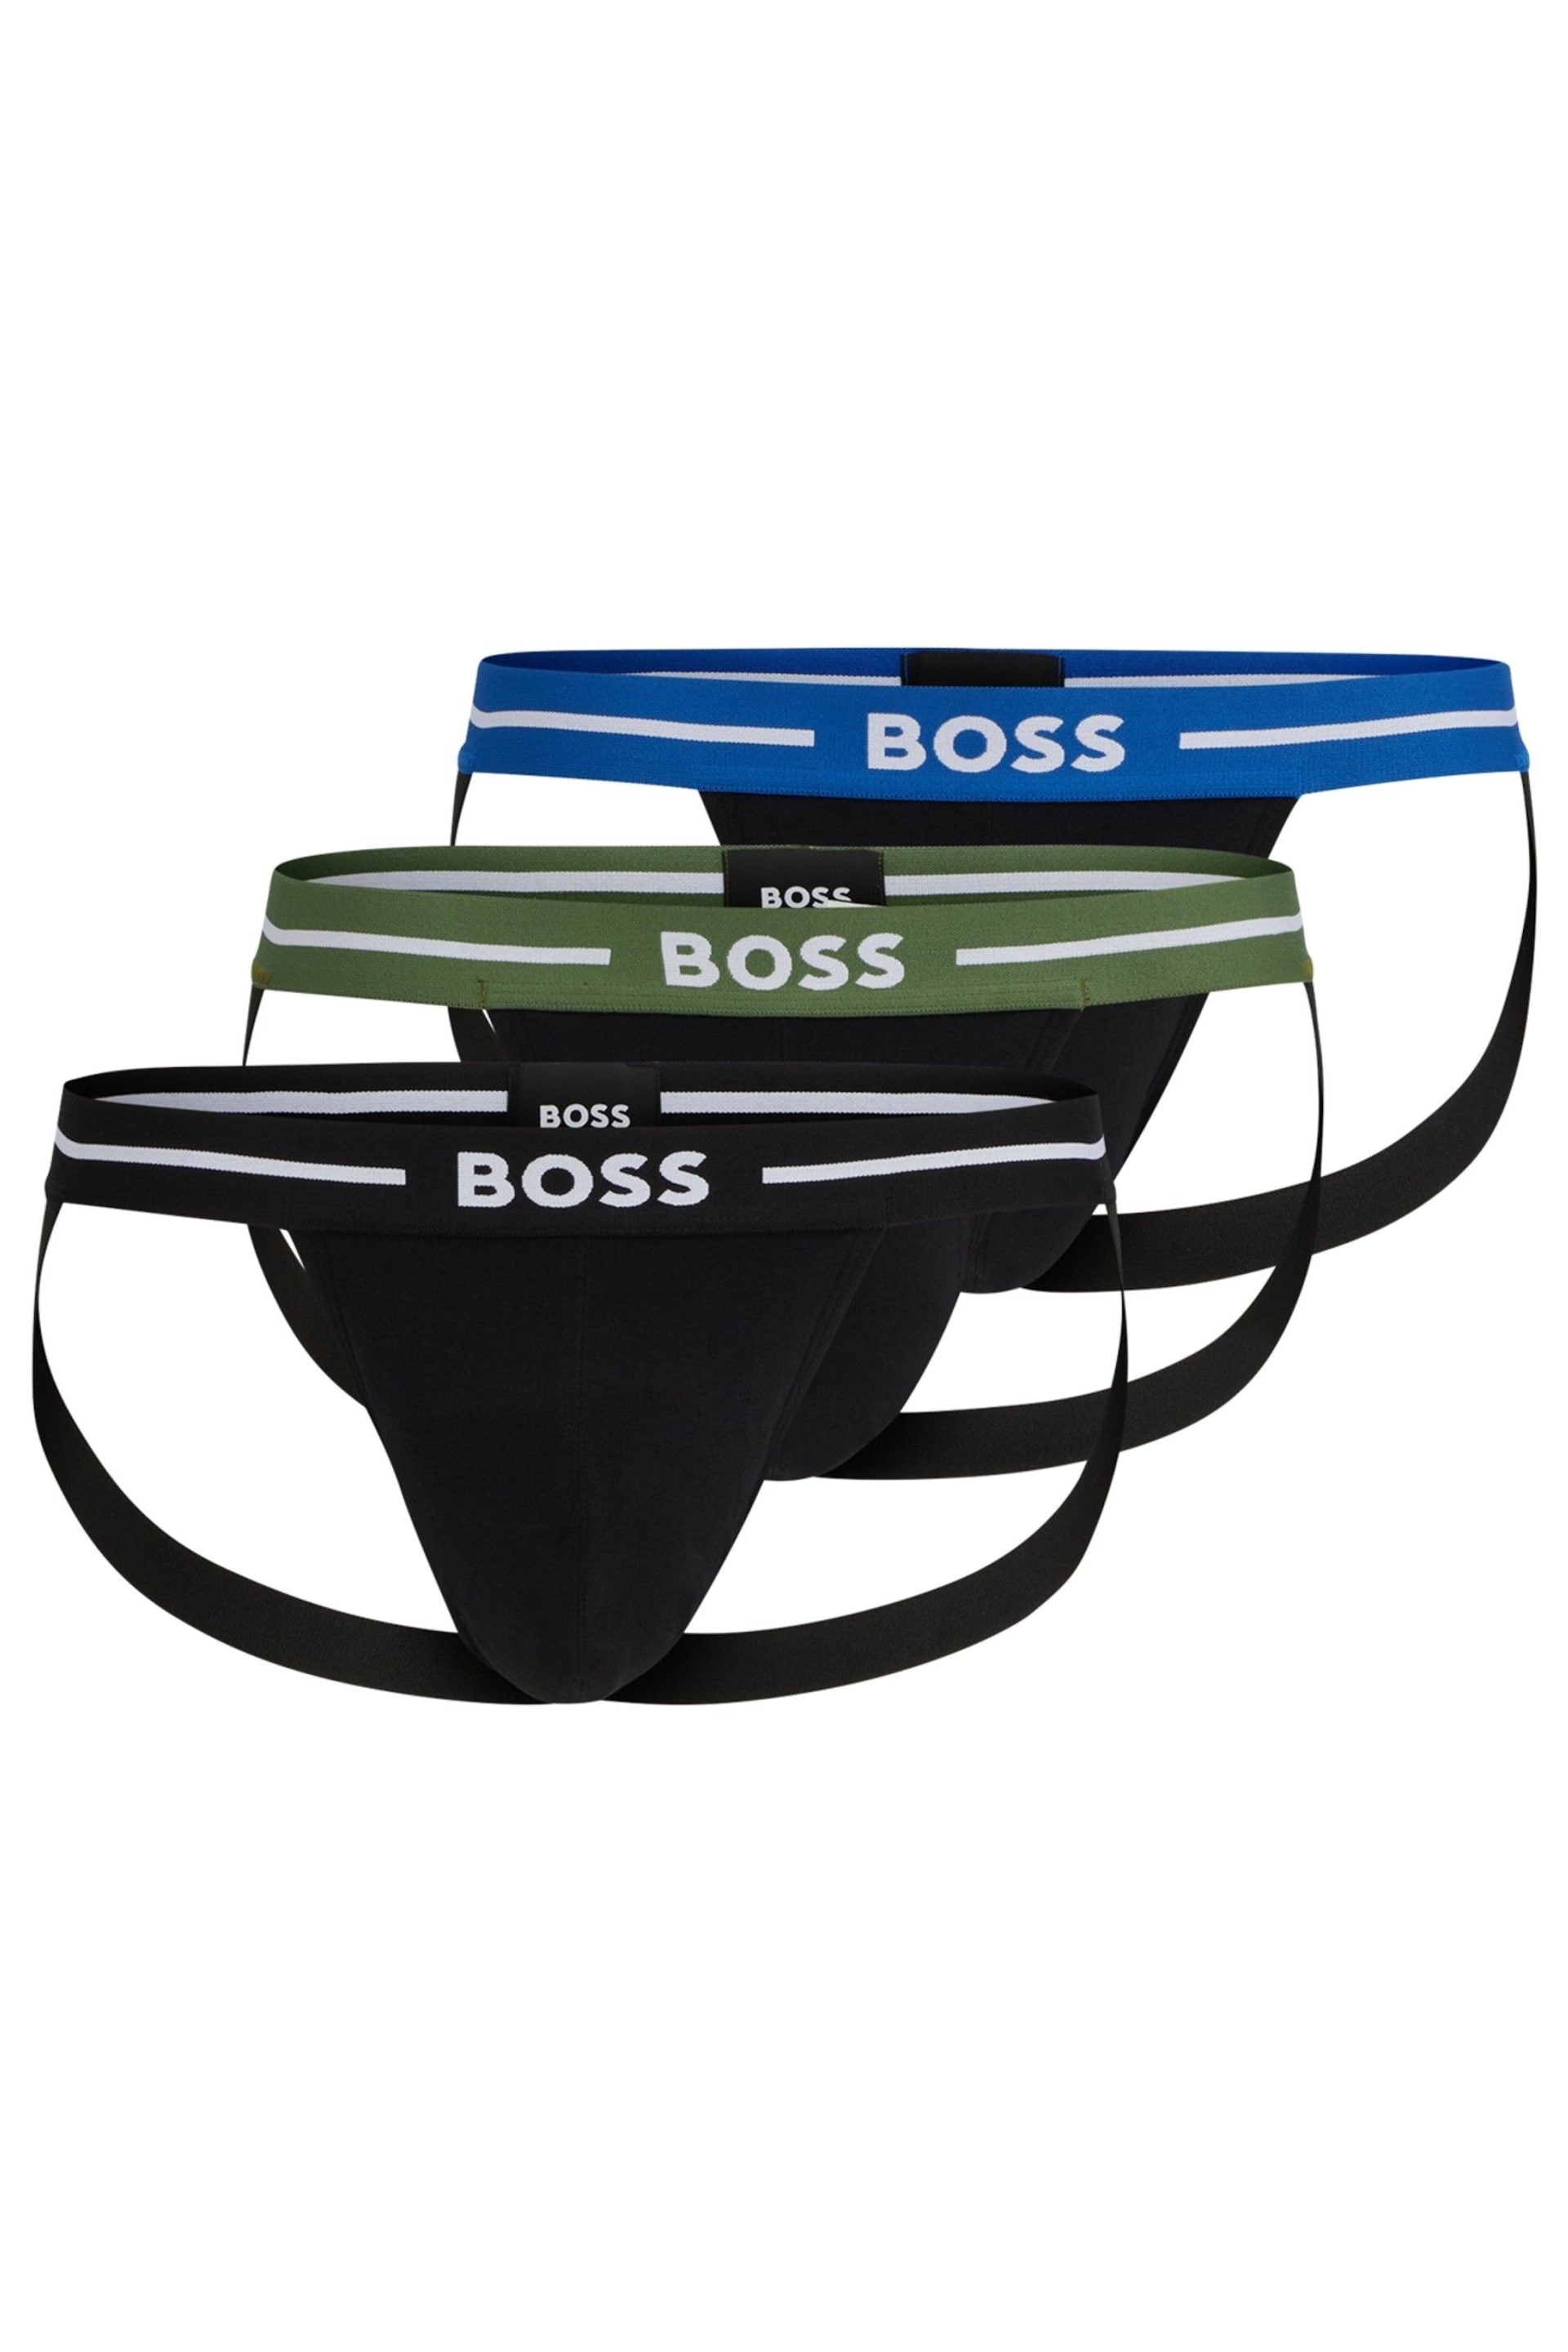 BOSS Black Three-Pack Of Stretch-Cotton Jock Straps With Logo Waistbands - Image 7 of 7